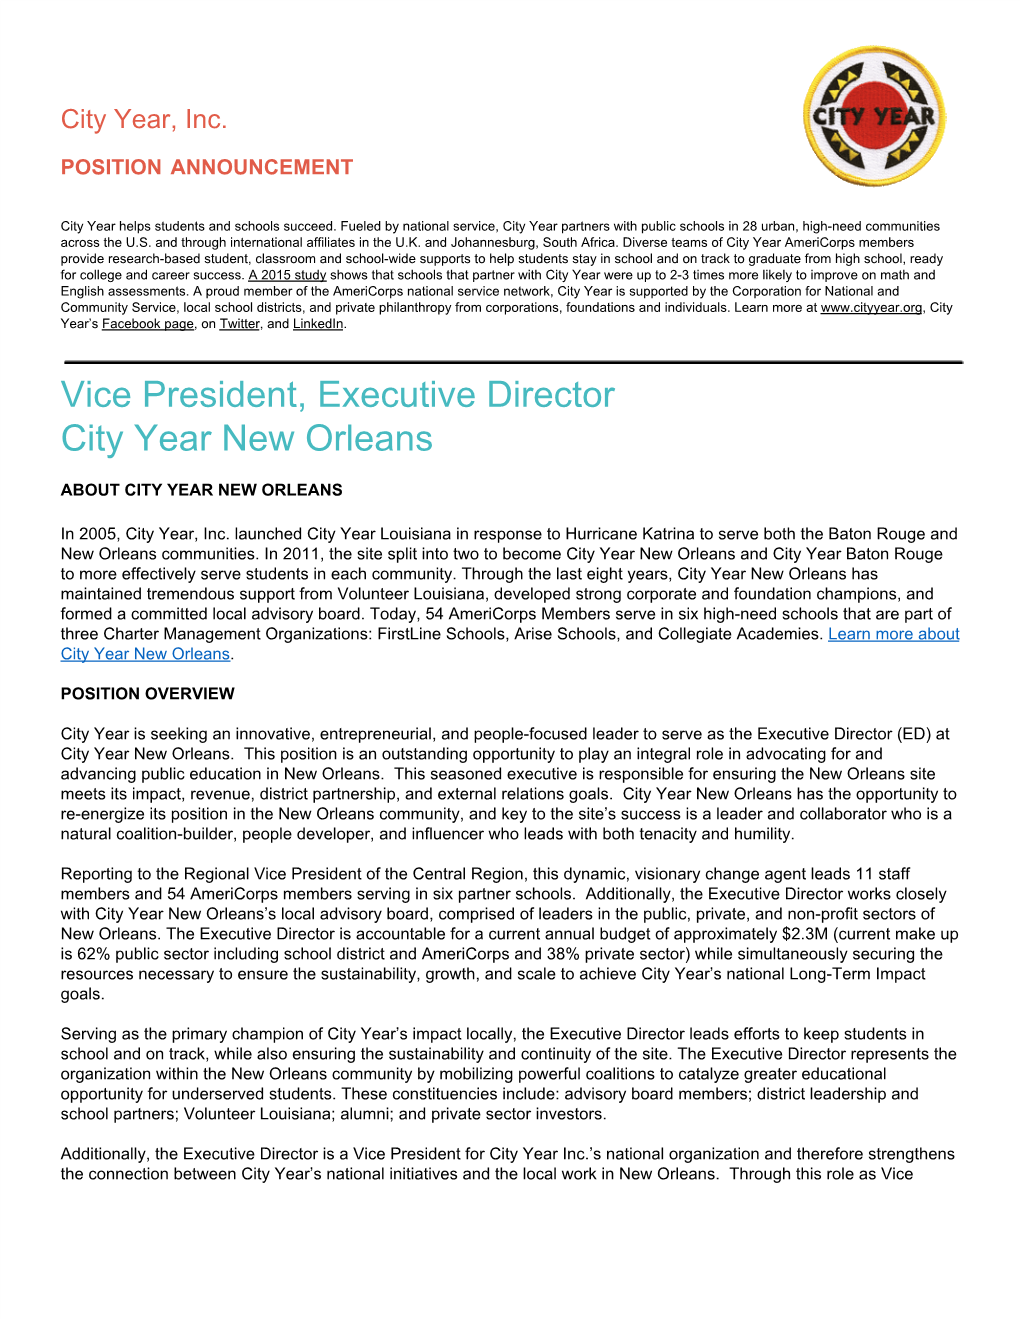 Vice President, Executive Director City Year New Orleans